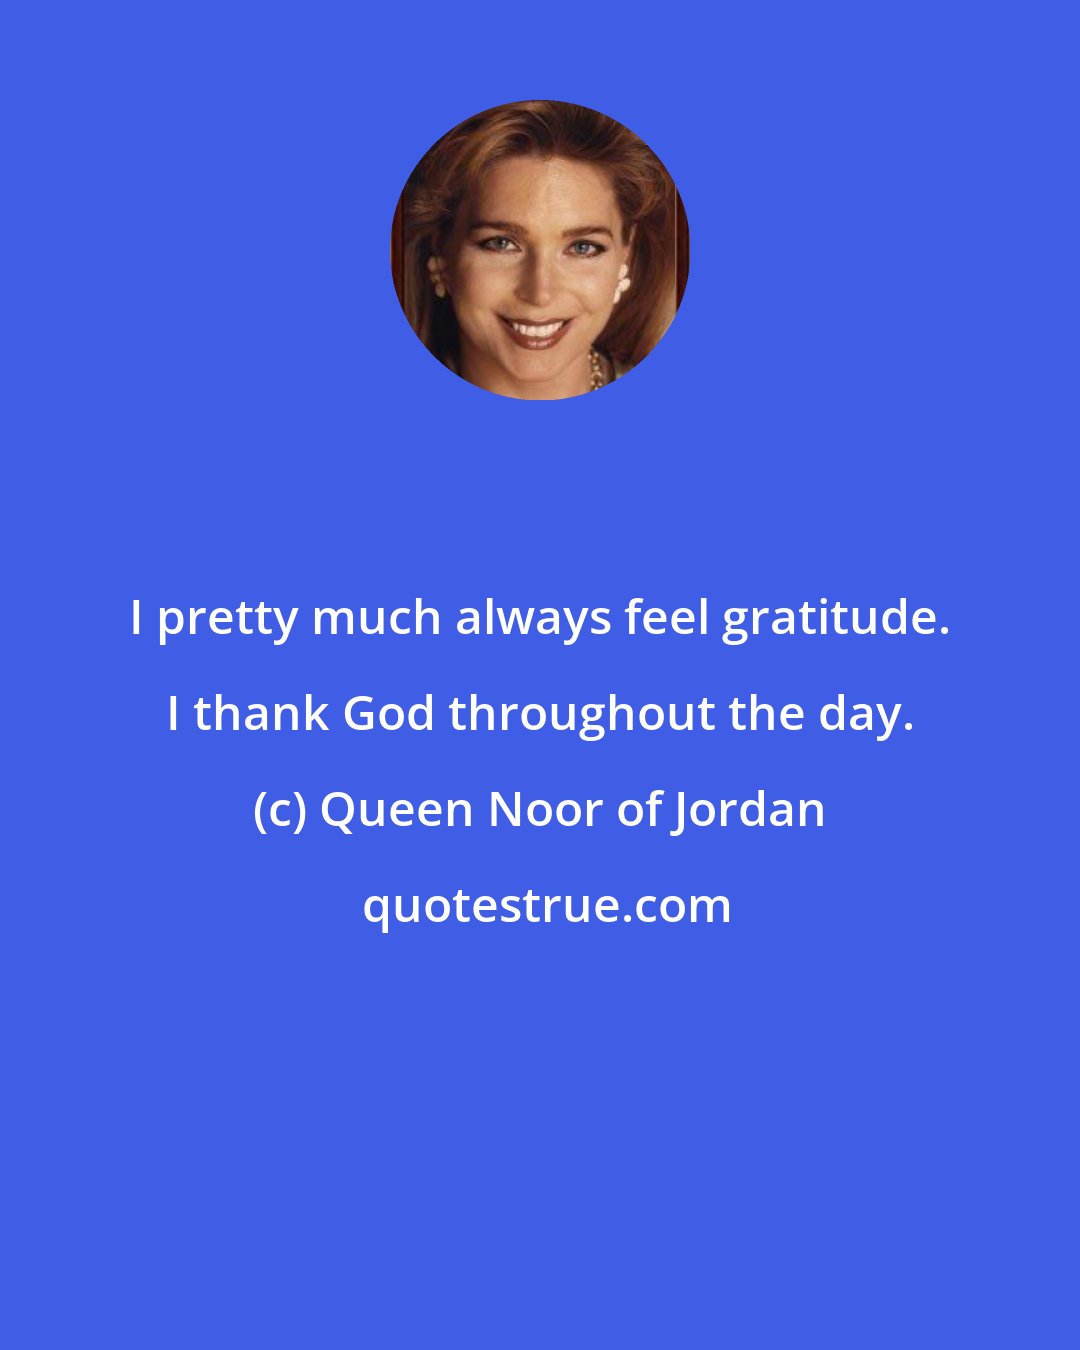 Queen Noor of Jordan: I pretty much always feel gratitude. I thank God throughout the day.